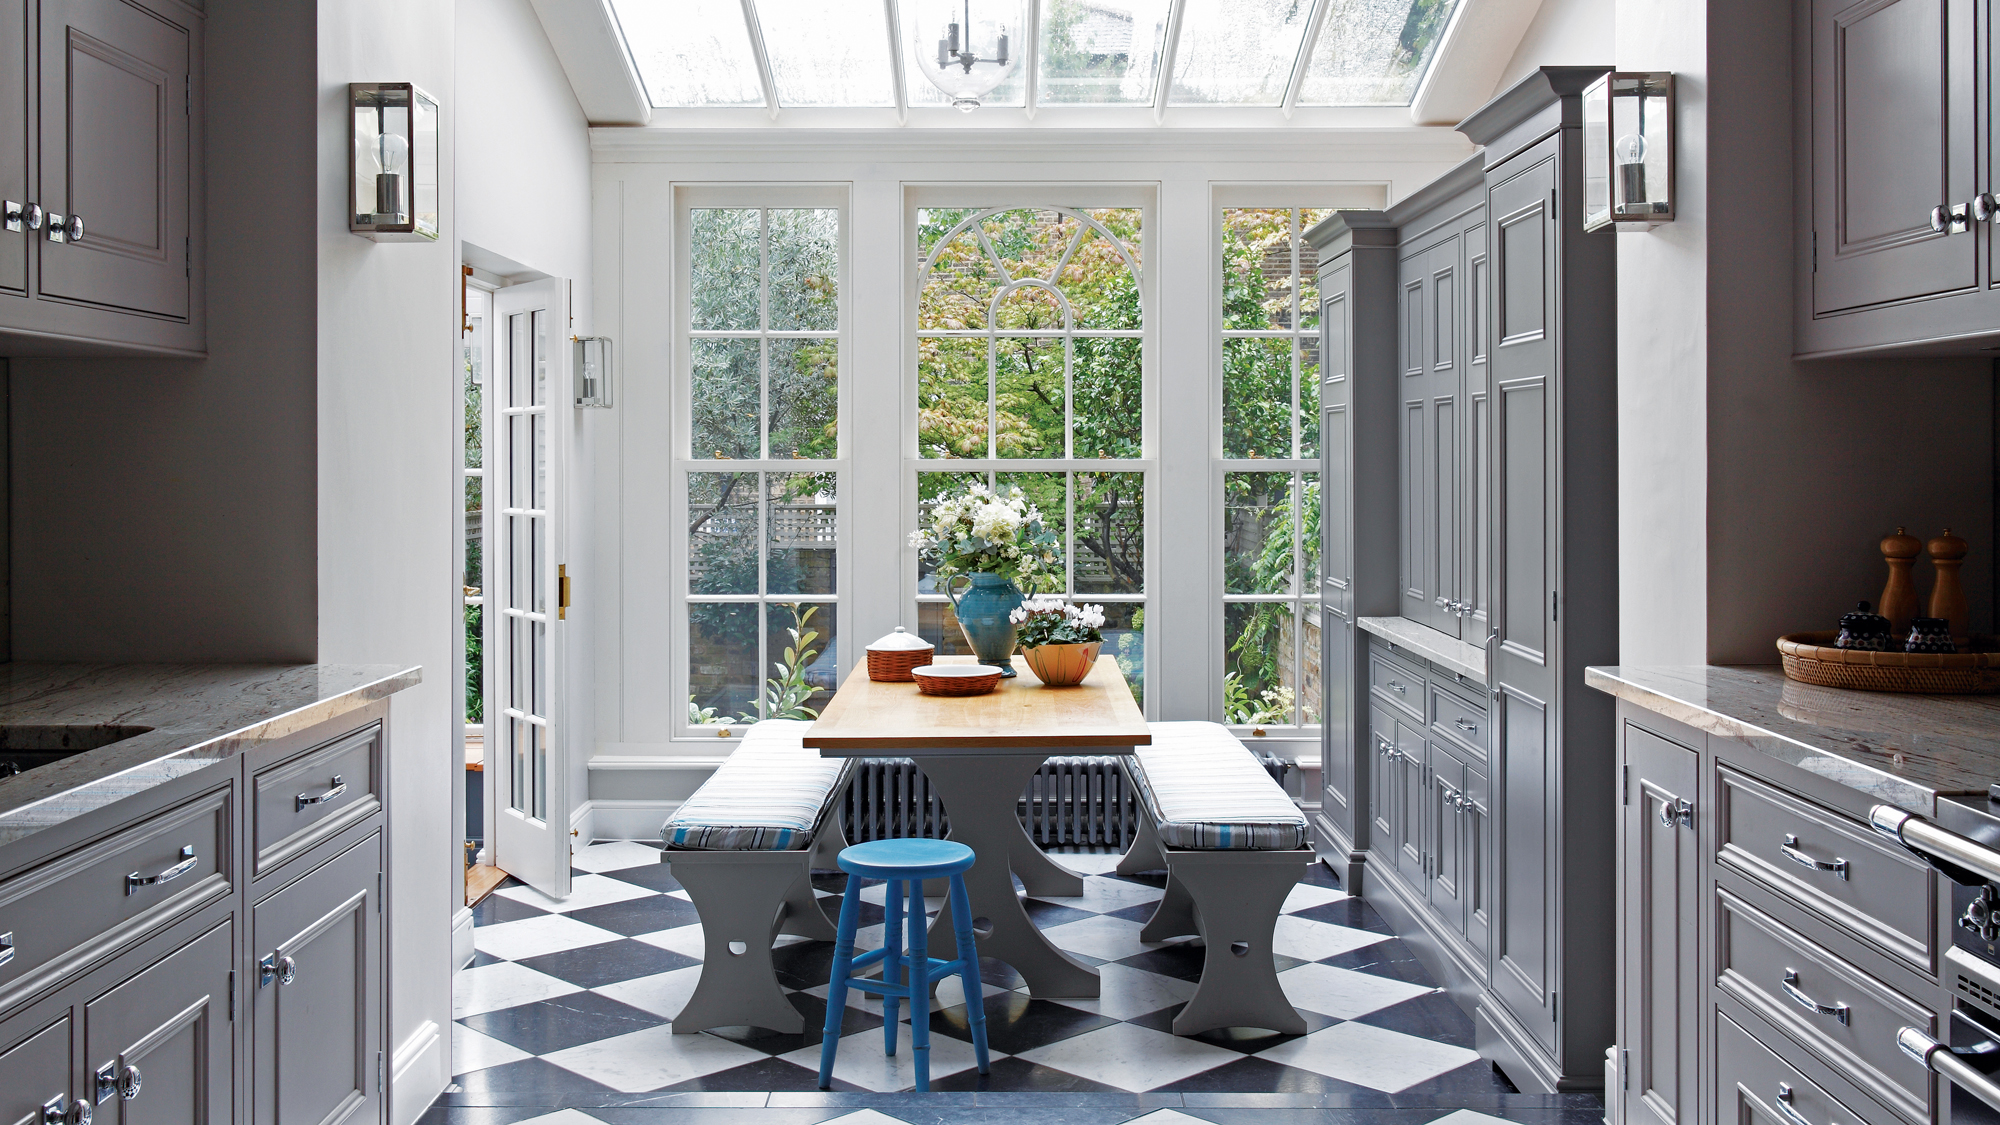 Which kitchen floor tiles are best? Designer knowhow you'll want